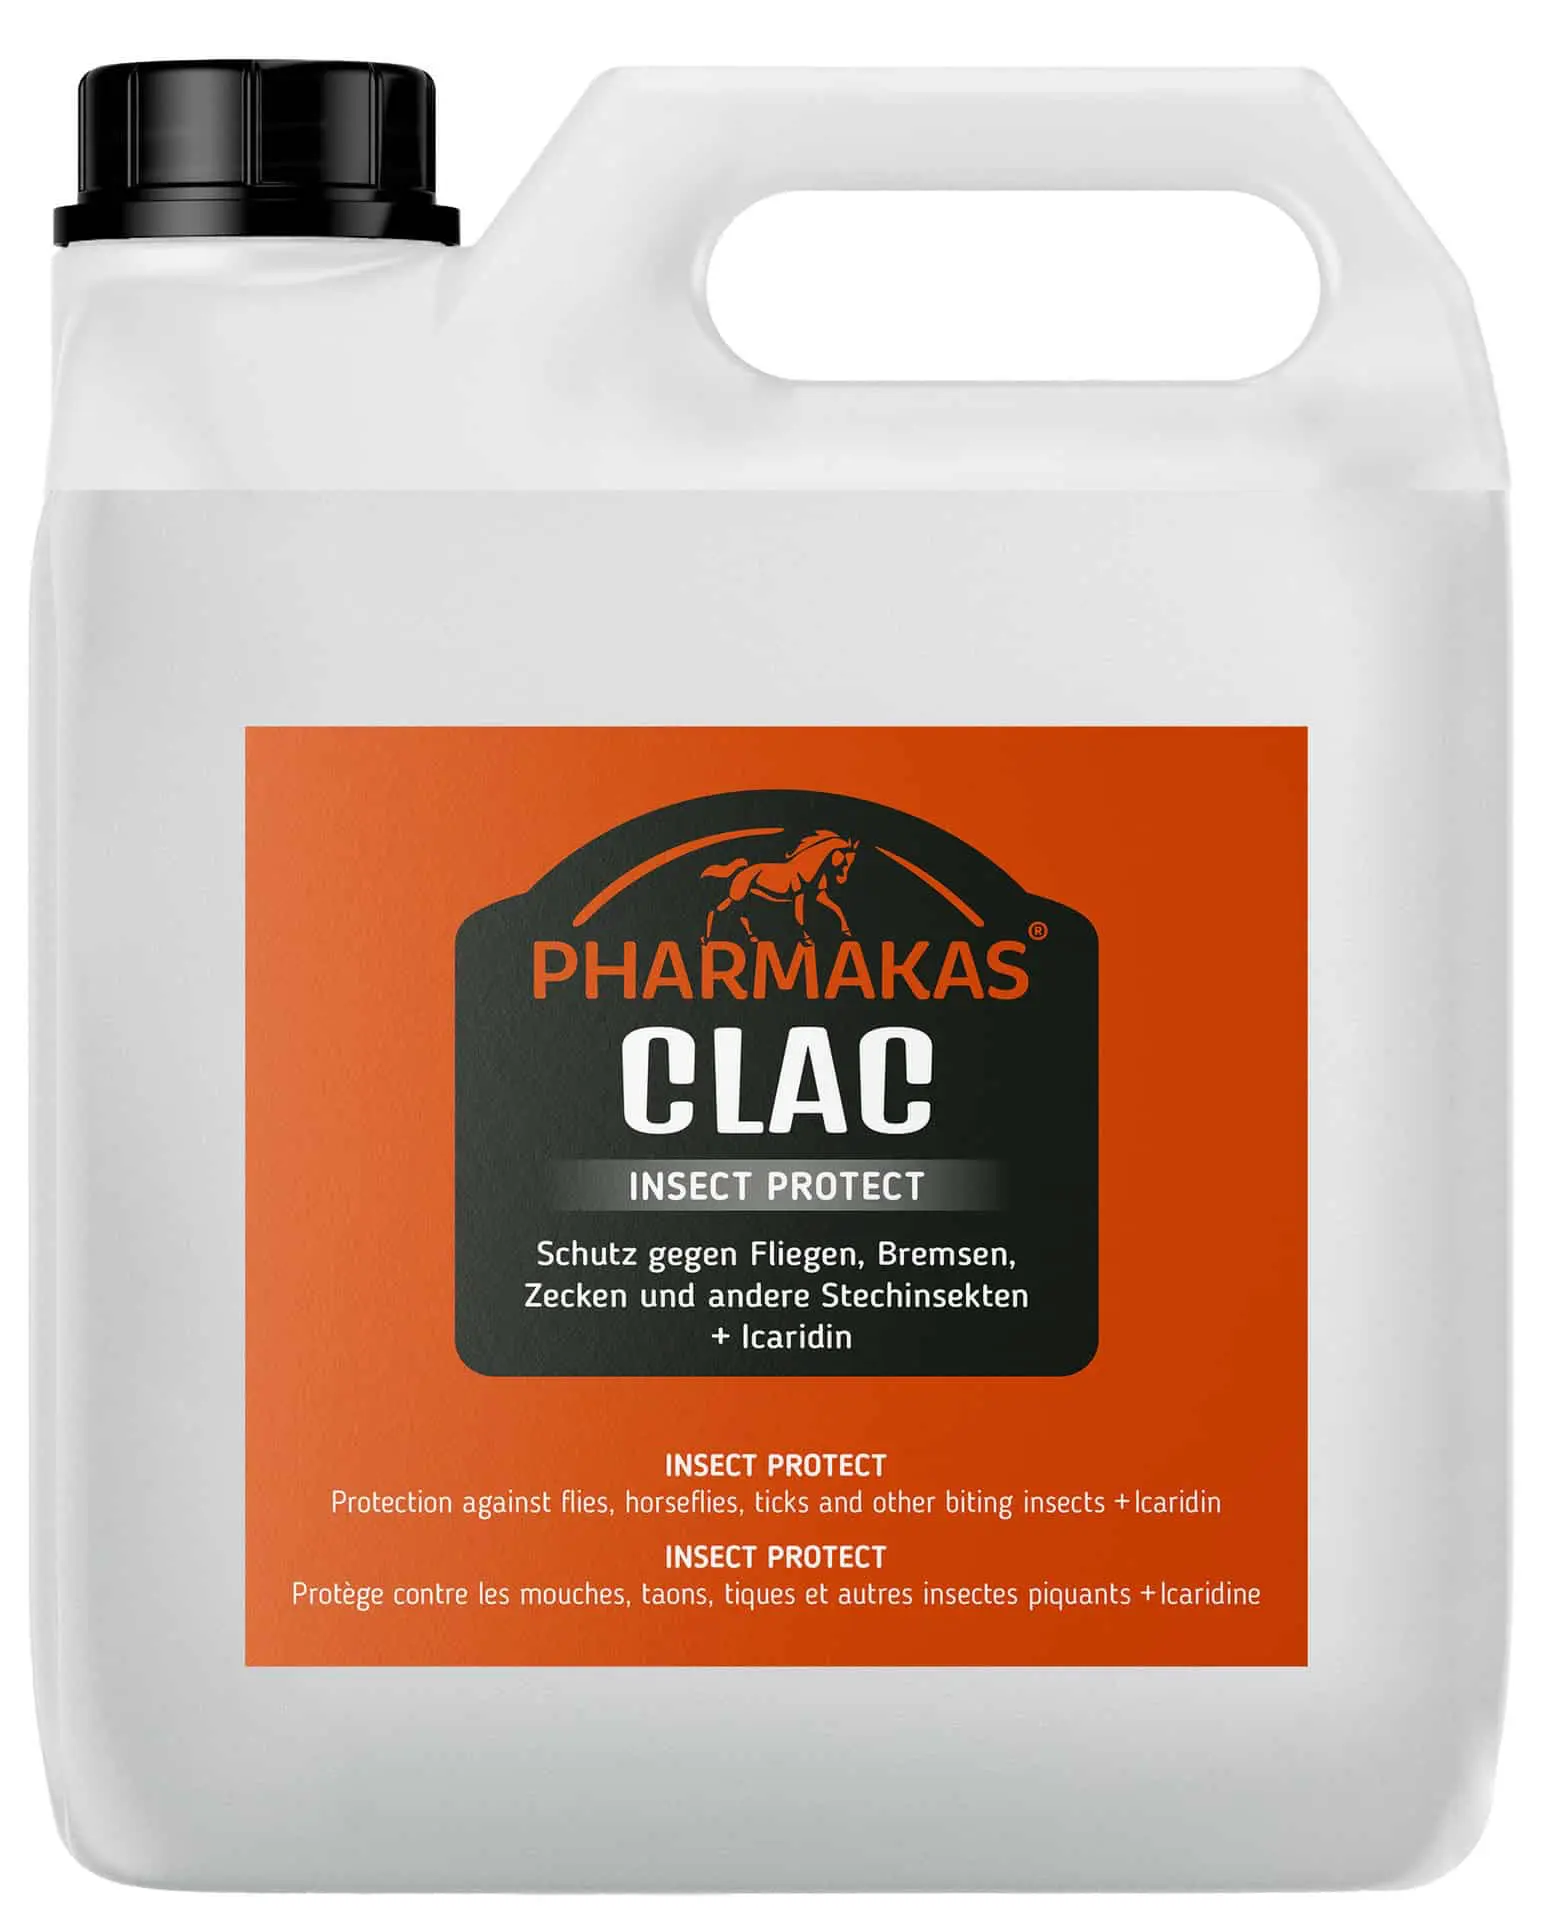 Pharmakas Clac Insect Protect 2.5 litre